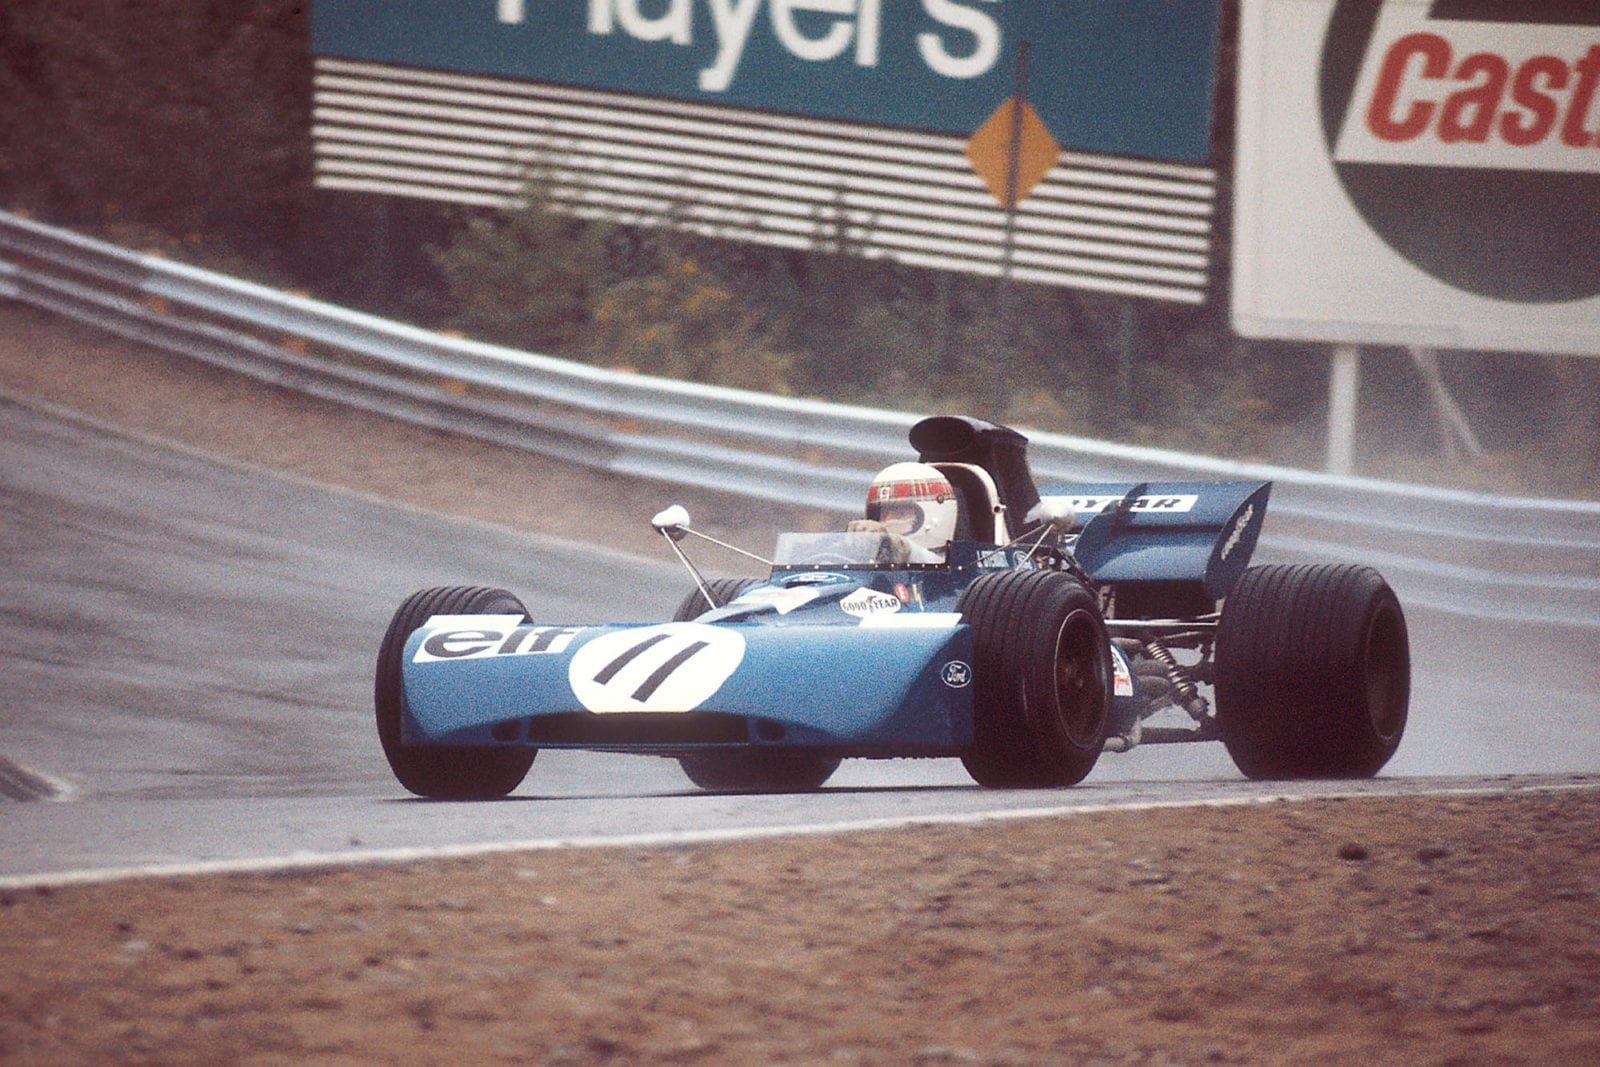 Jackie Stewart driving for Tyrrell at the 1971 Canadian Grand Prix.